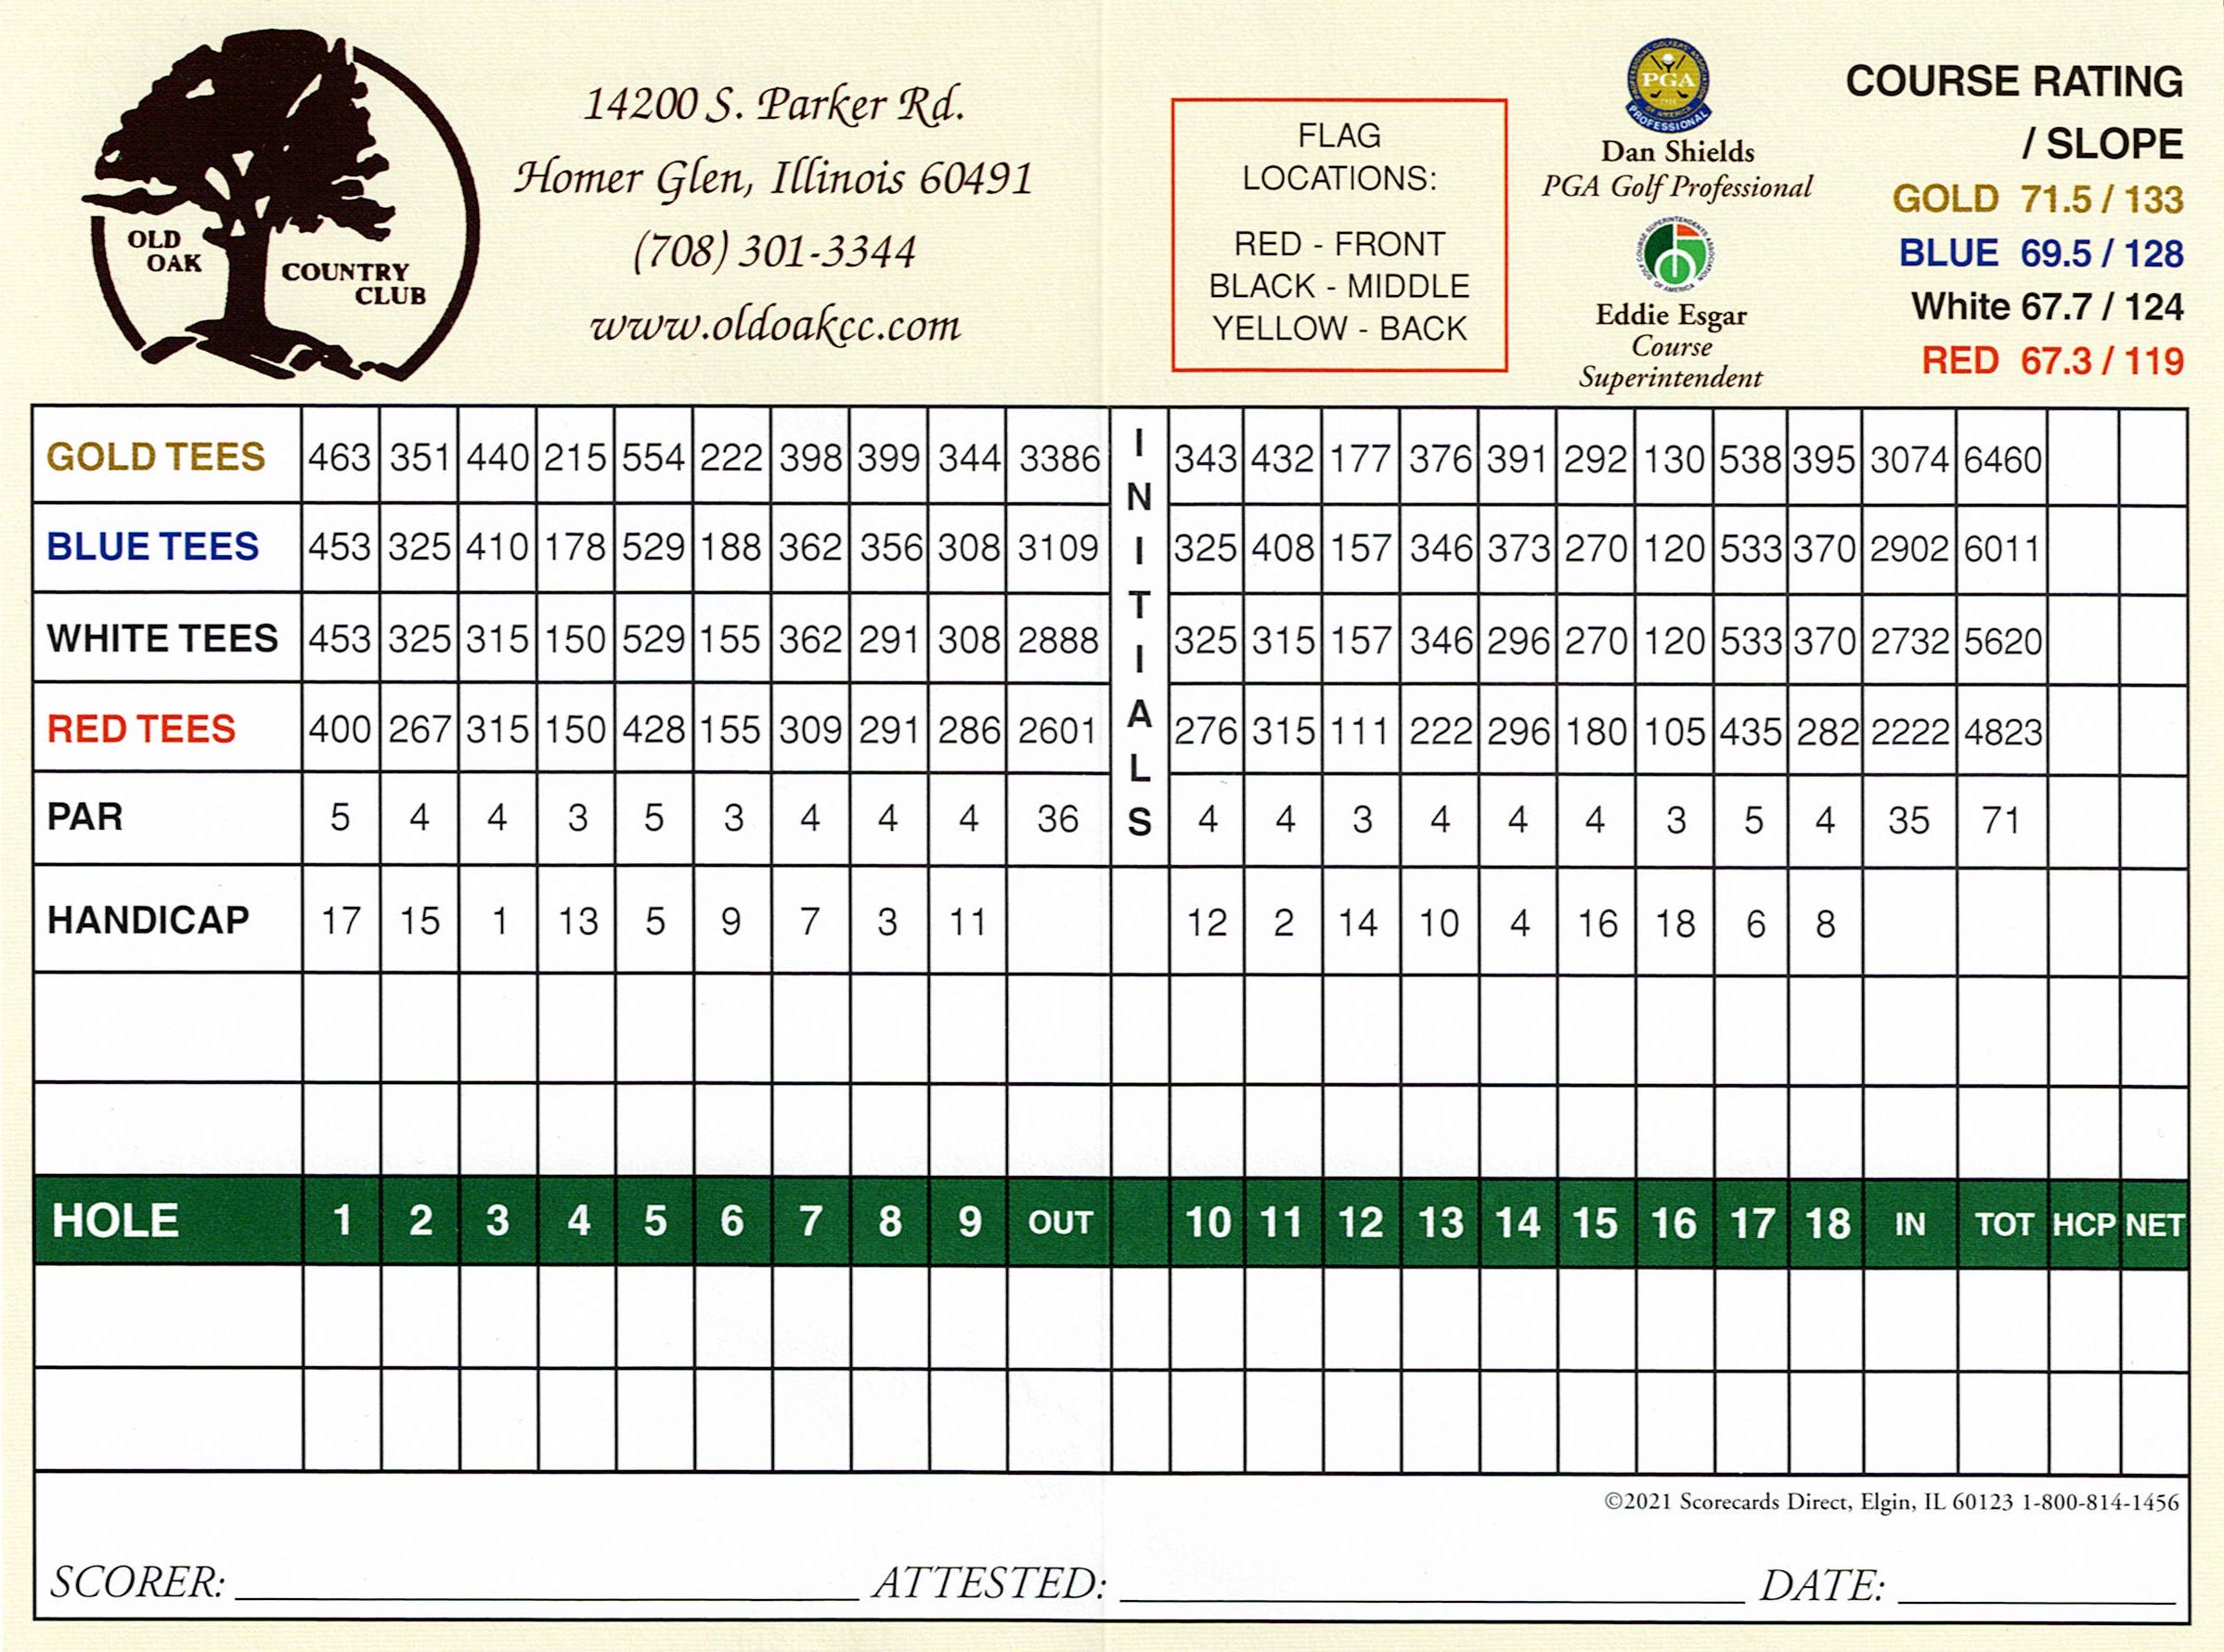 Scan of the scorecard from Old Oak Country Club in Homer Glen, Illinois. 